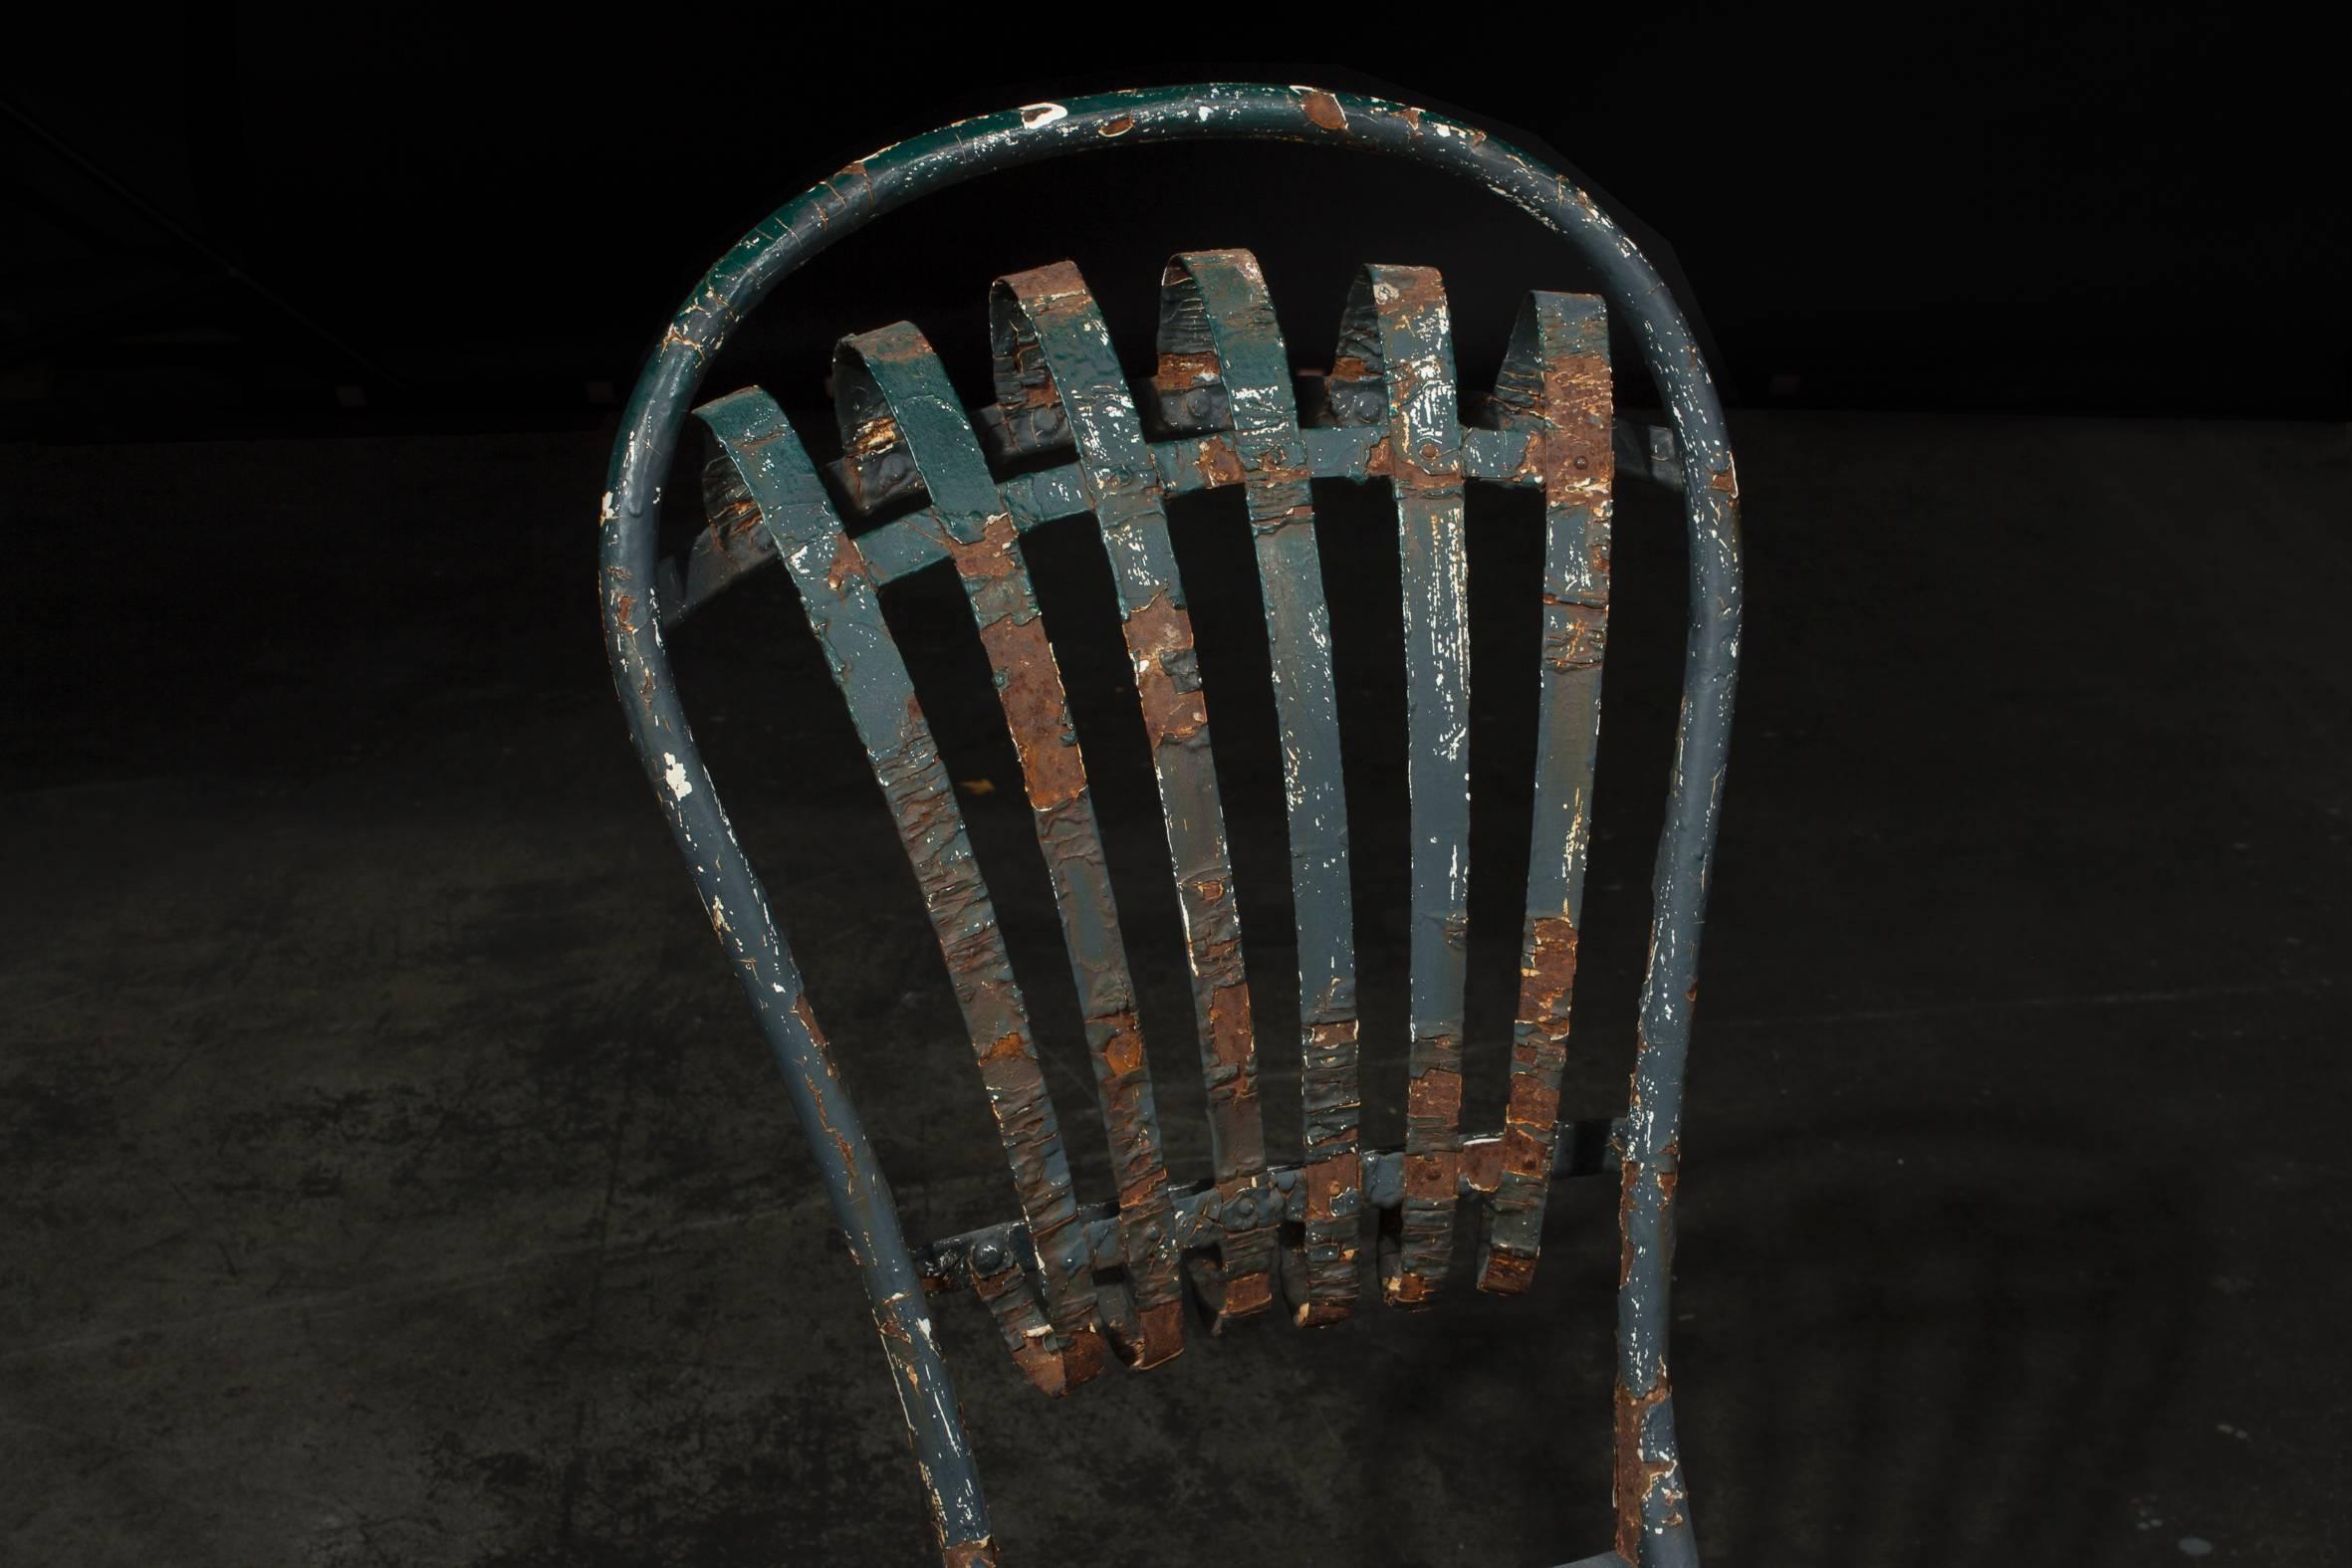 French Two Iron and Wood Garden Chairs in Beautiful Aged Condition, circa 1860